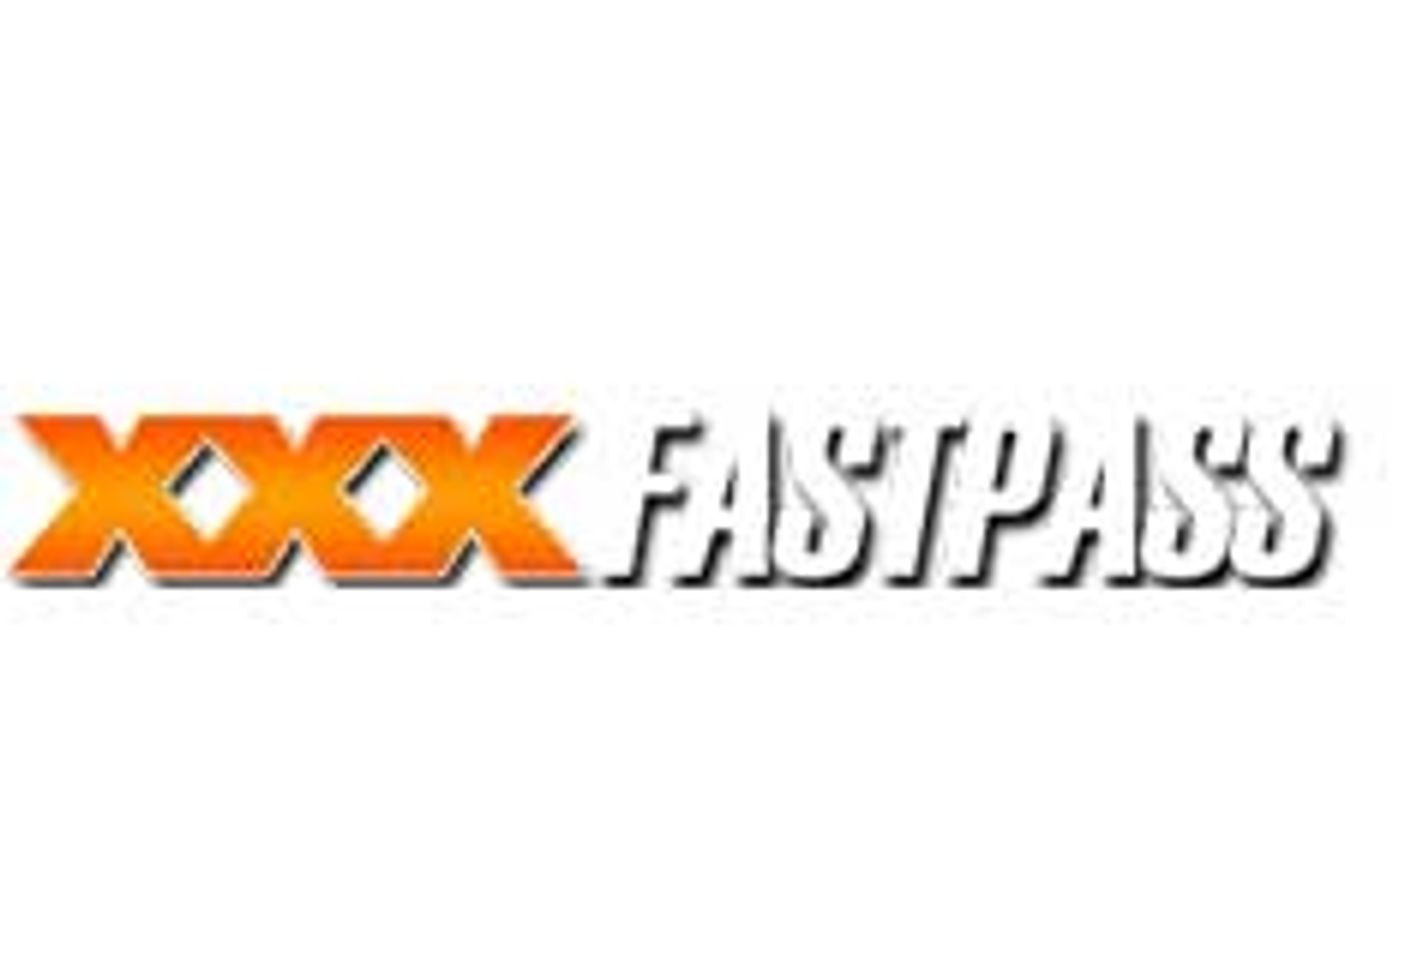 The XxxFastPass Network Takes Over Tampa